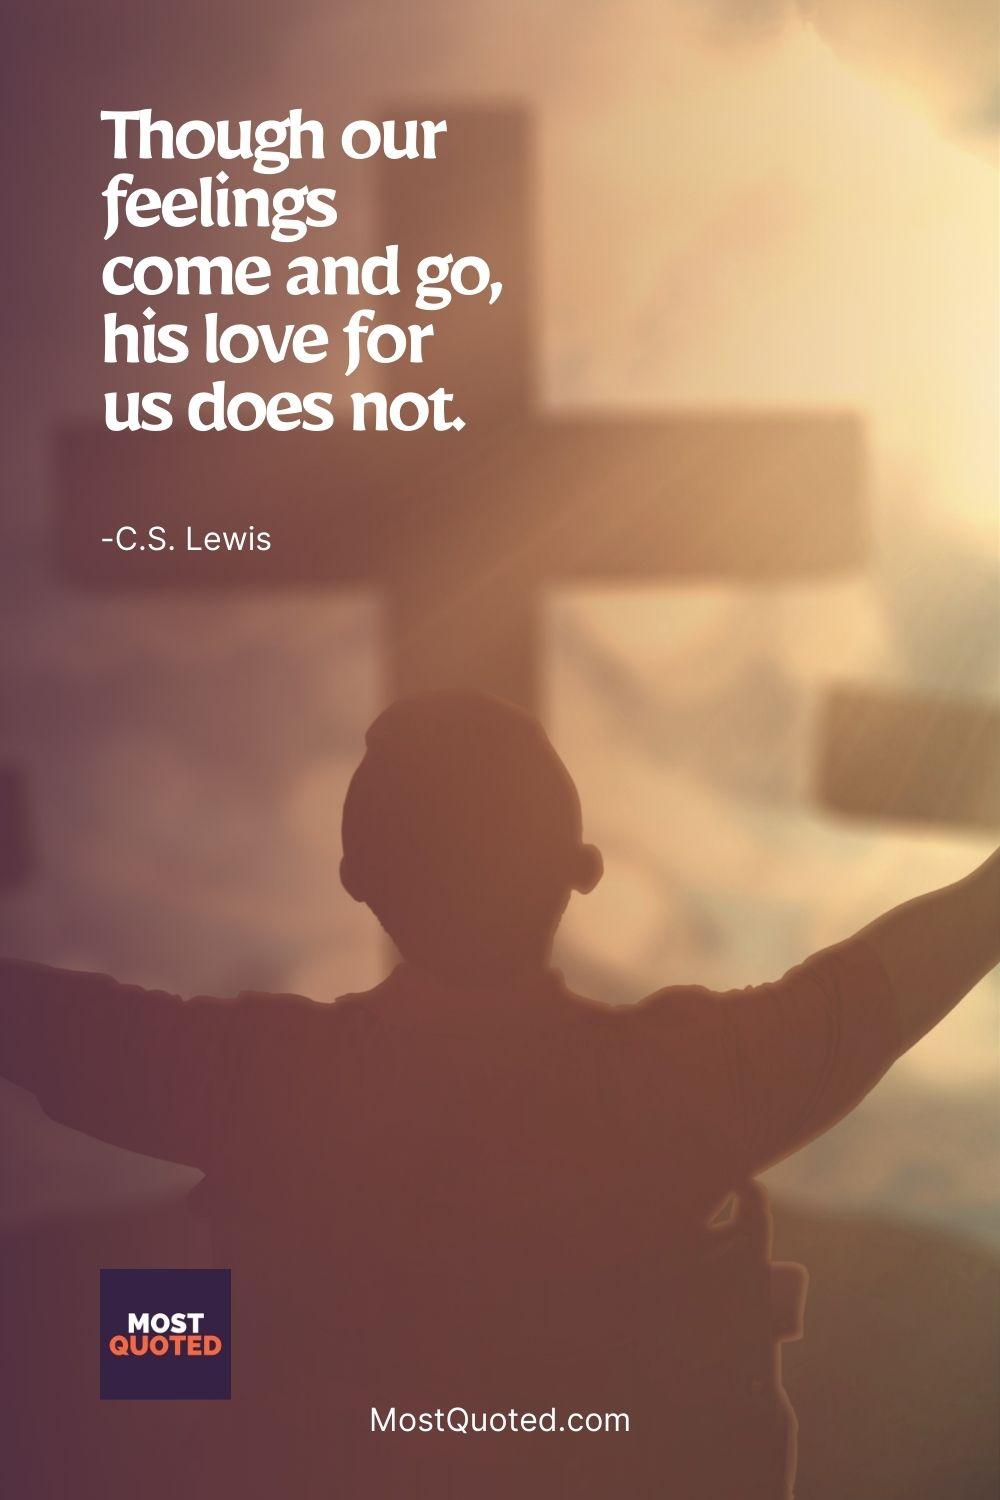 Though our feelings come and go, his love for us does not. - C.S. Lewis